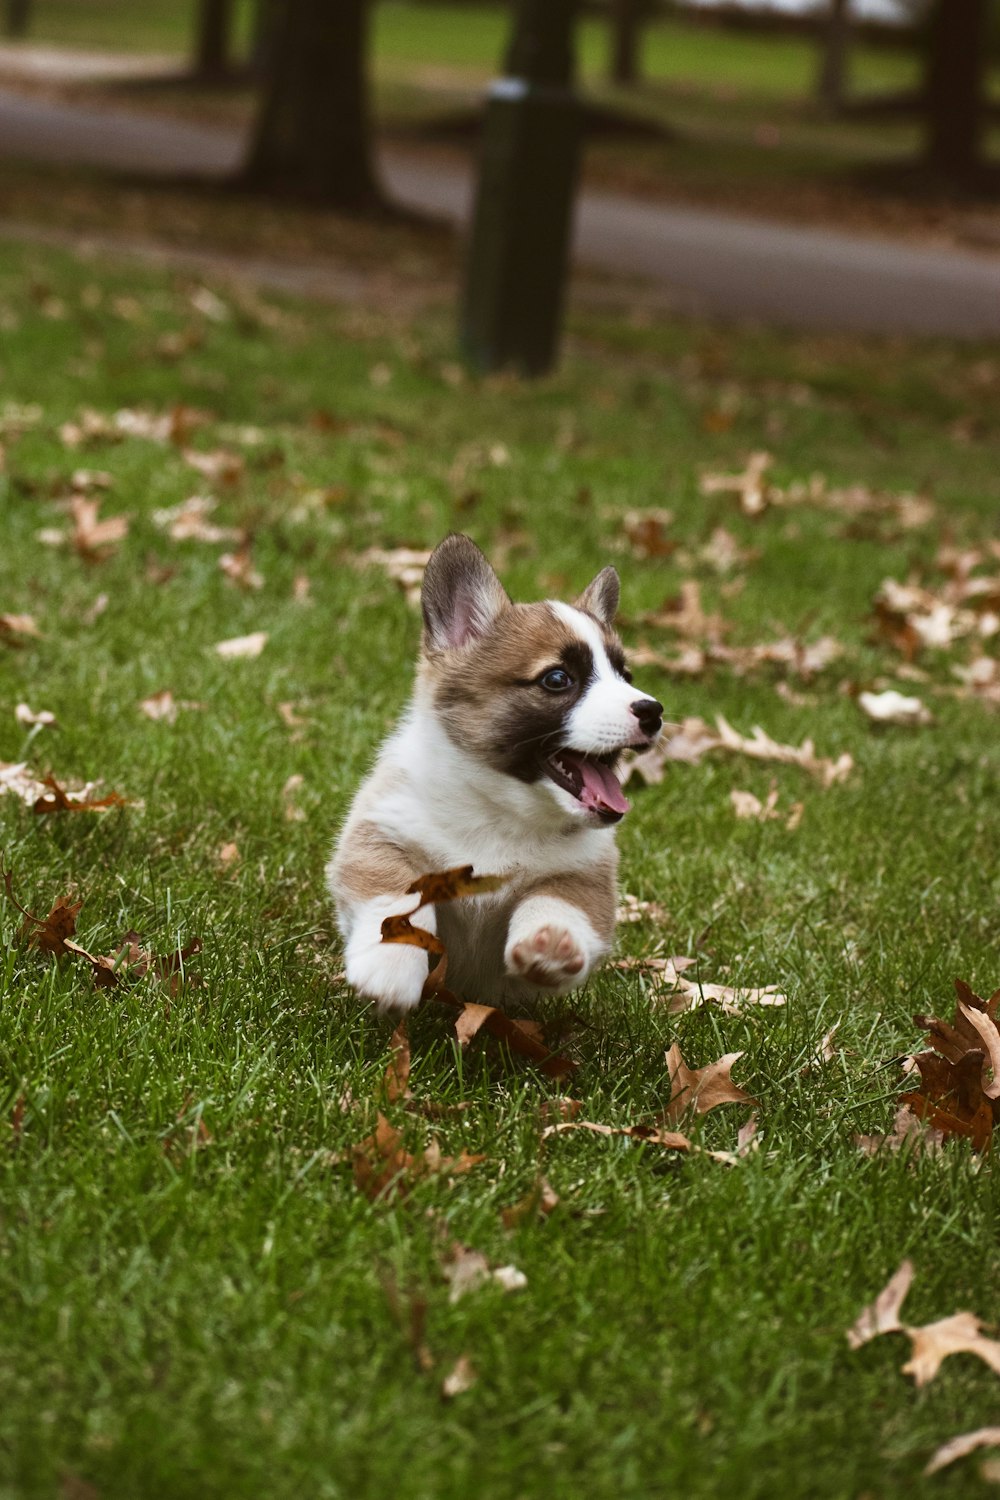 white and brown puppy running on green grass field during daytime